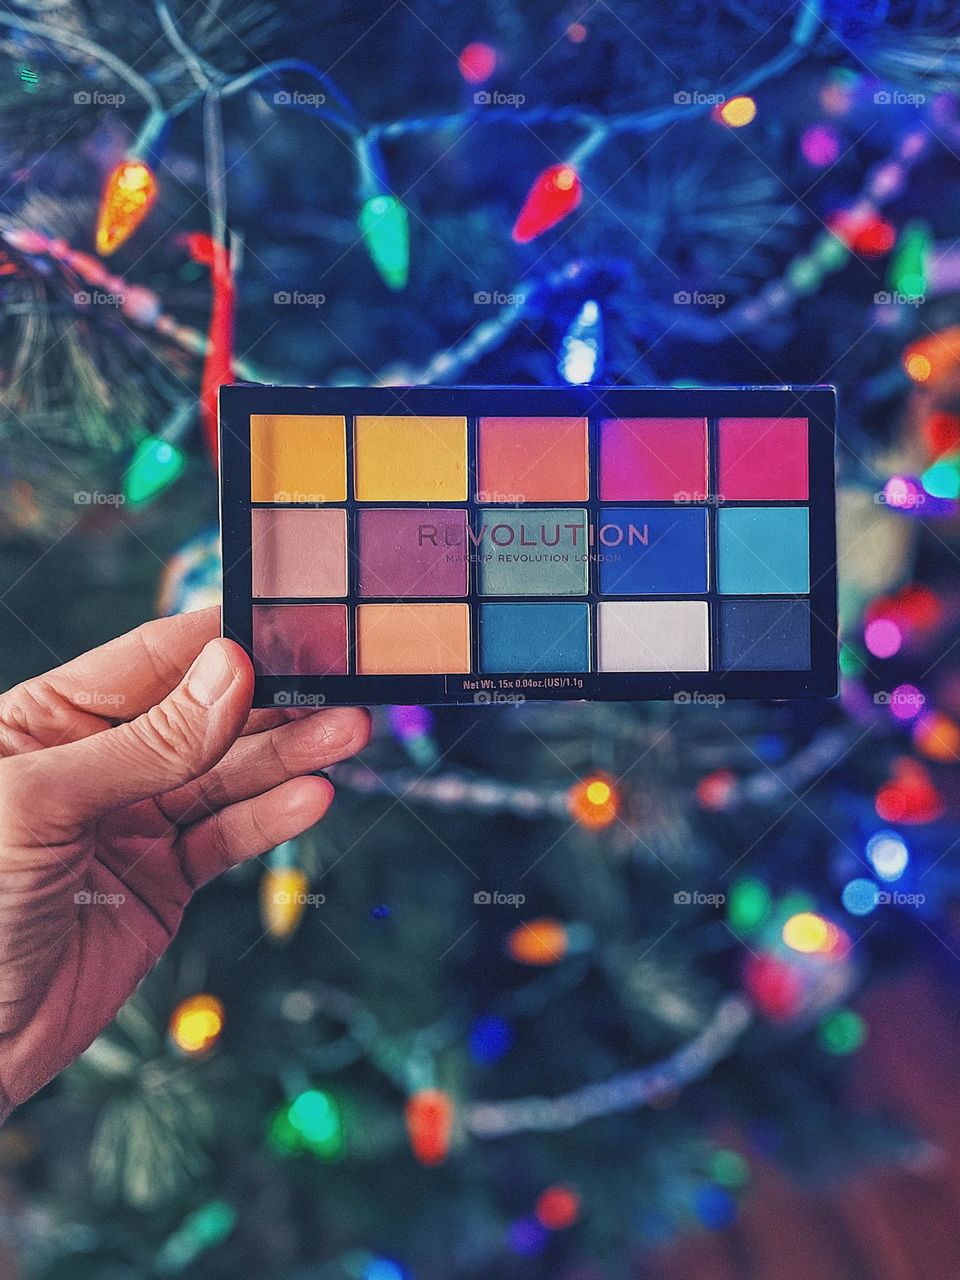 Woman holding eye shadow palette over Christmas tree, woman’s hand holding beauty product, Revolution makeup product, Revolution eye shadow palette, beauty products for a Christmas present, placing beauty products under the Christmas tree